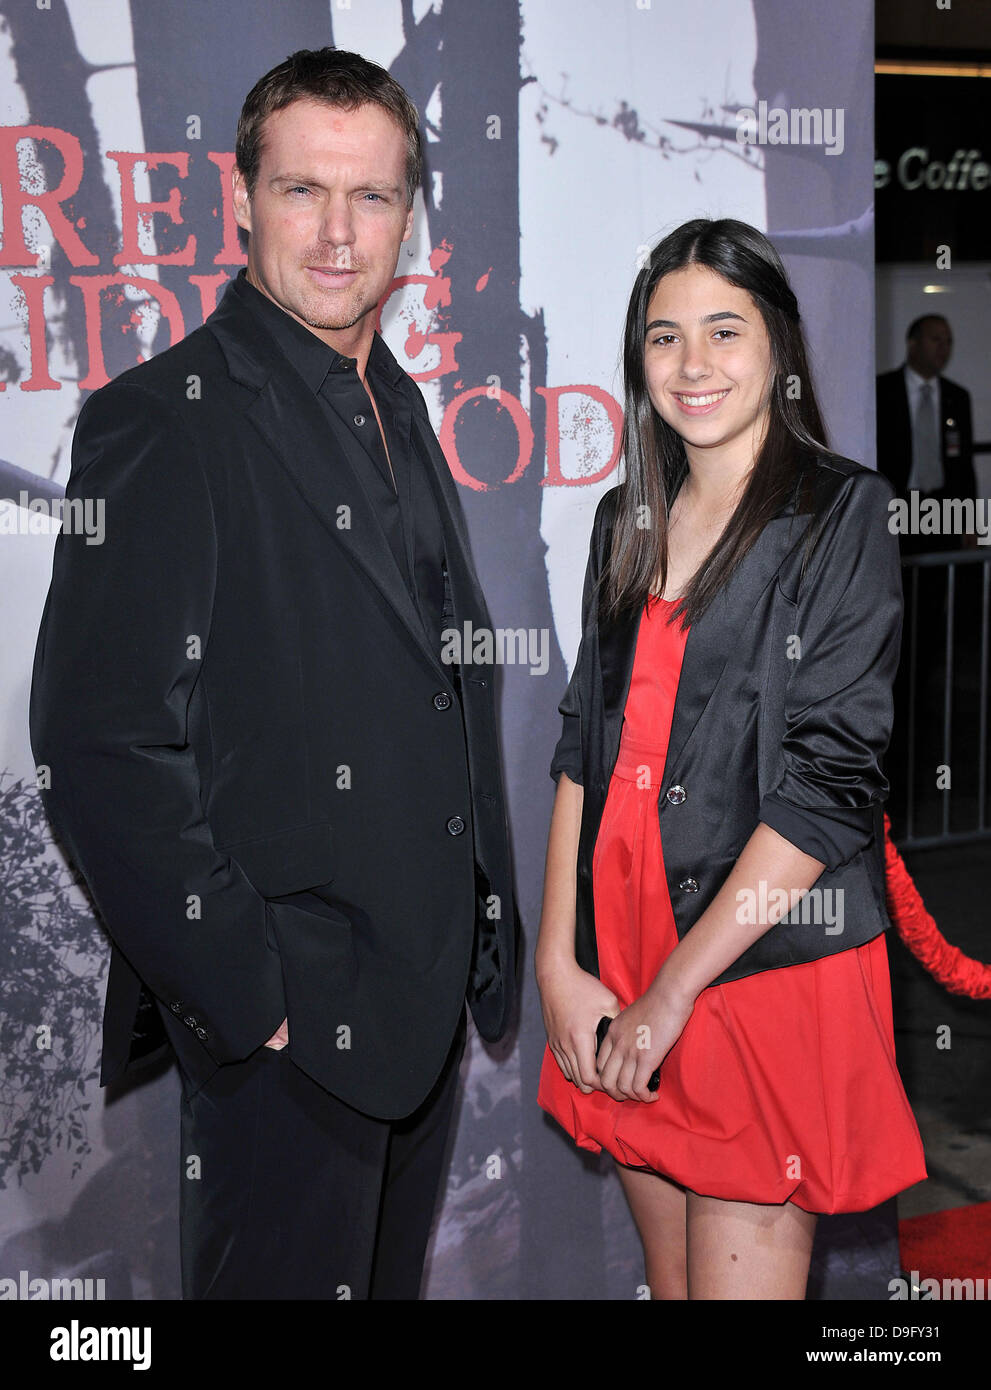 Michael Shanks with his daughter Los Angeles Premiere of Warner Bros. Pictures 'Red Riding Hood' held at the Grauman's Chinese Theatre Hollywood, California - 07.03.11 Stock Photo